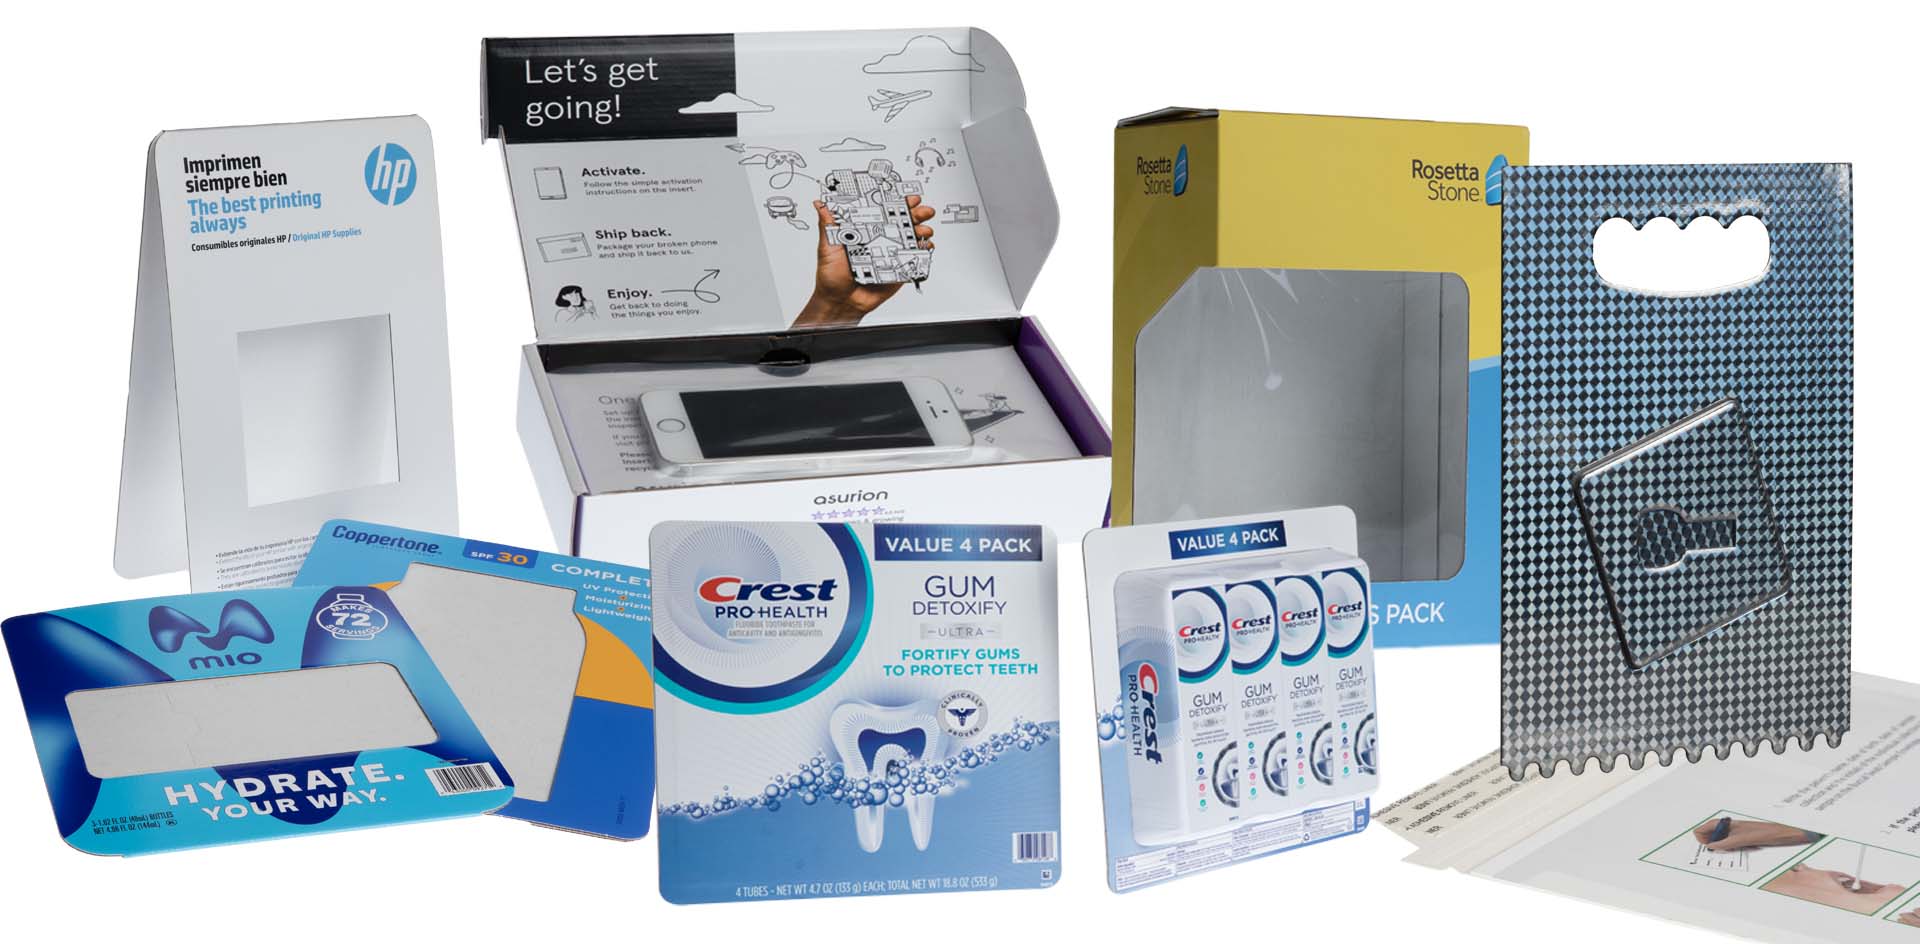 Packrite offers a wide range of innovative packaging including paper and film blister packs, windows, tension frames, tear and pressure sensitive tapes